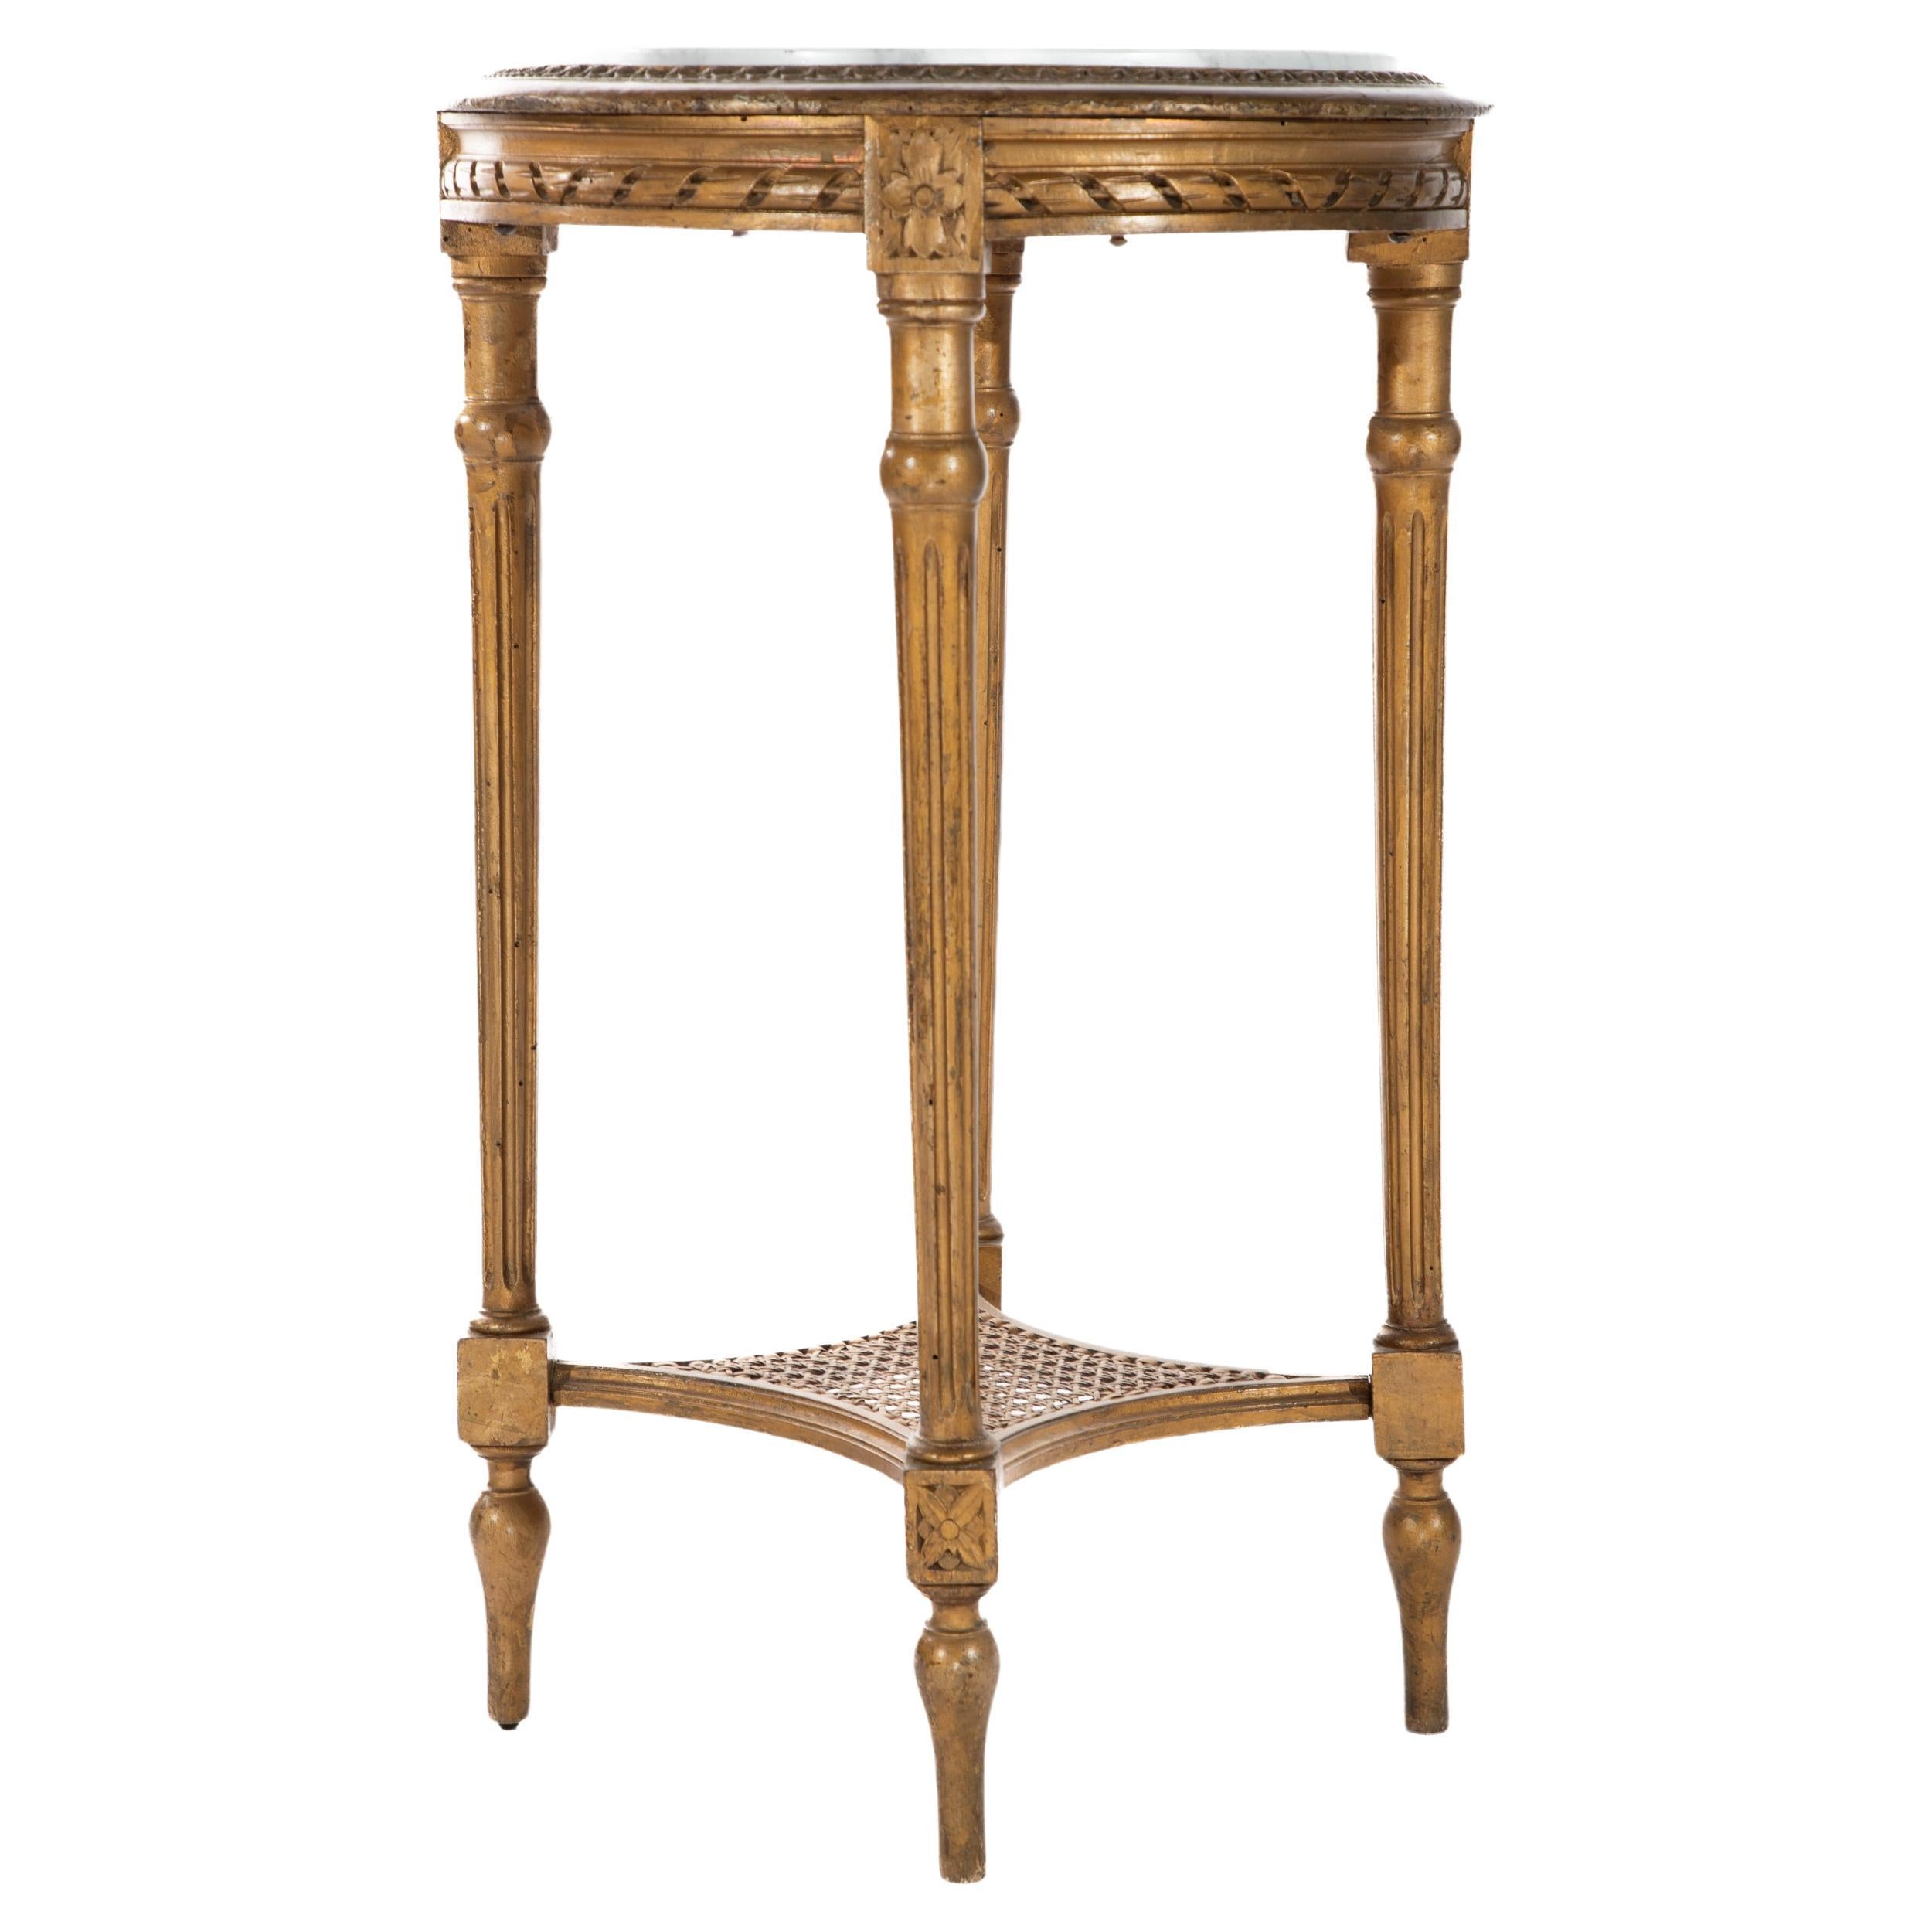 Beautiful French carved and gilt Louis XVI-style side table with inset marble top and lower caned shelf.